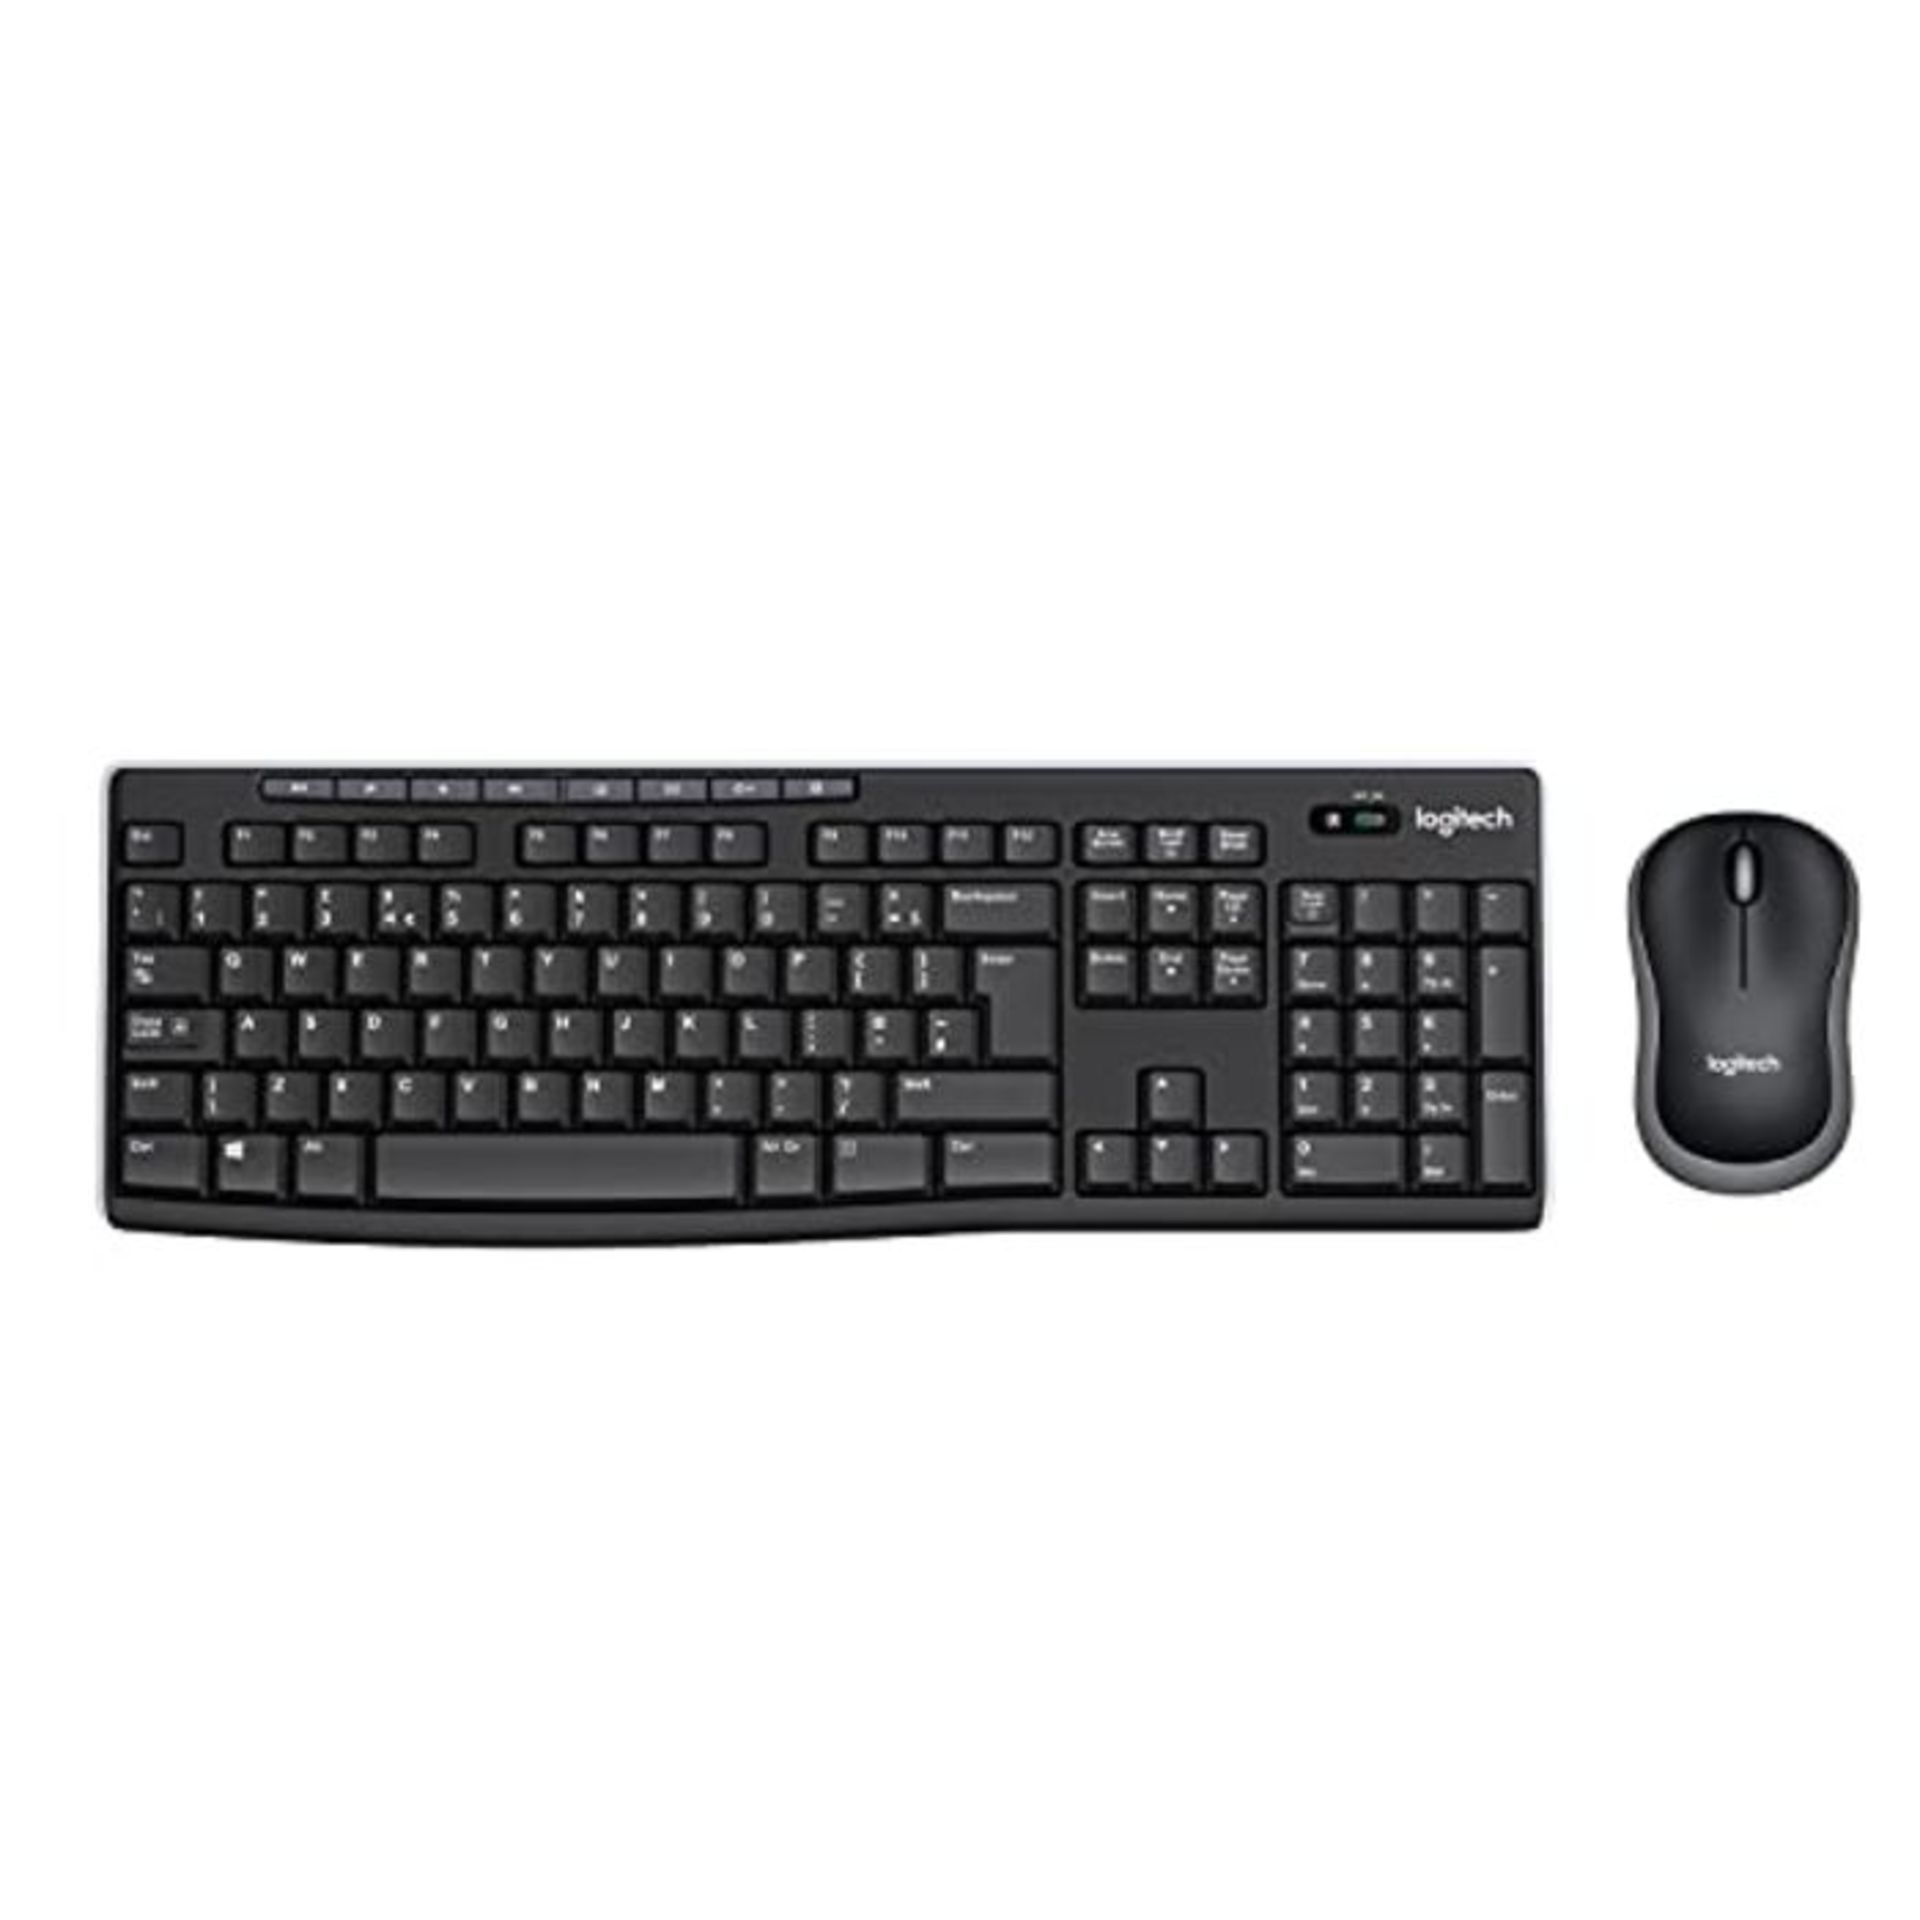 [INCOMPLETE] [CRACKED] Logitech MK270 Wireless Keyboard and Mouse Combo for Windows, 2